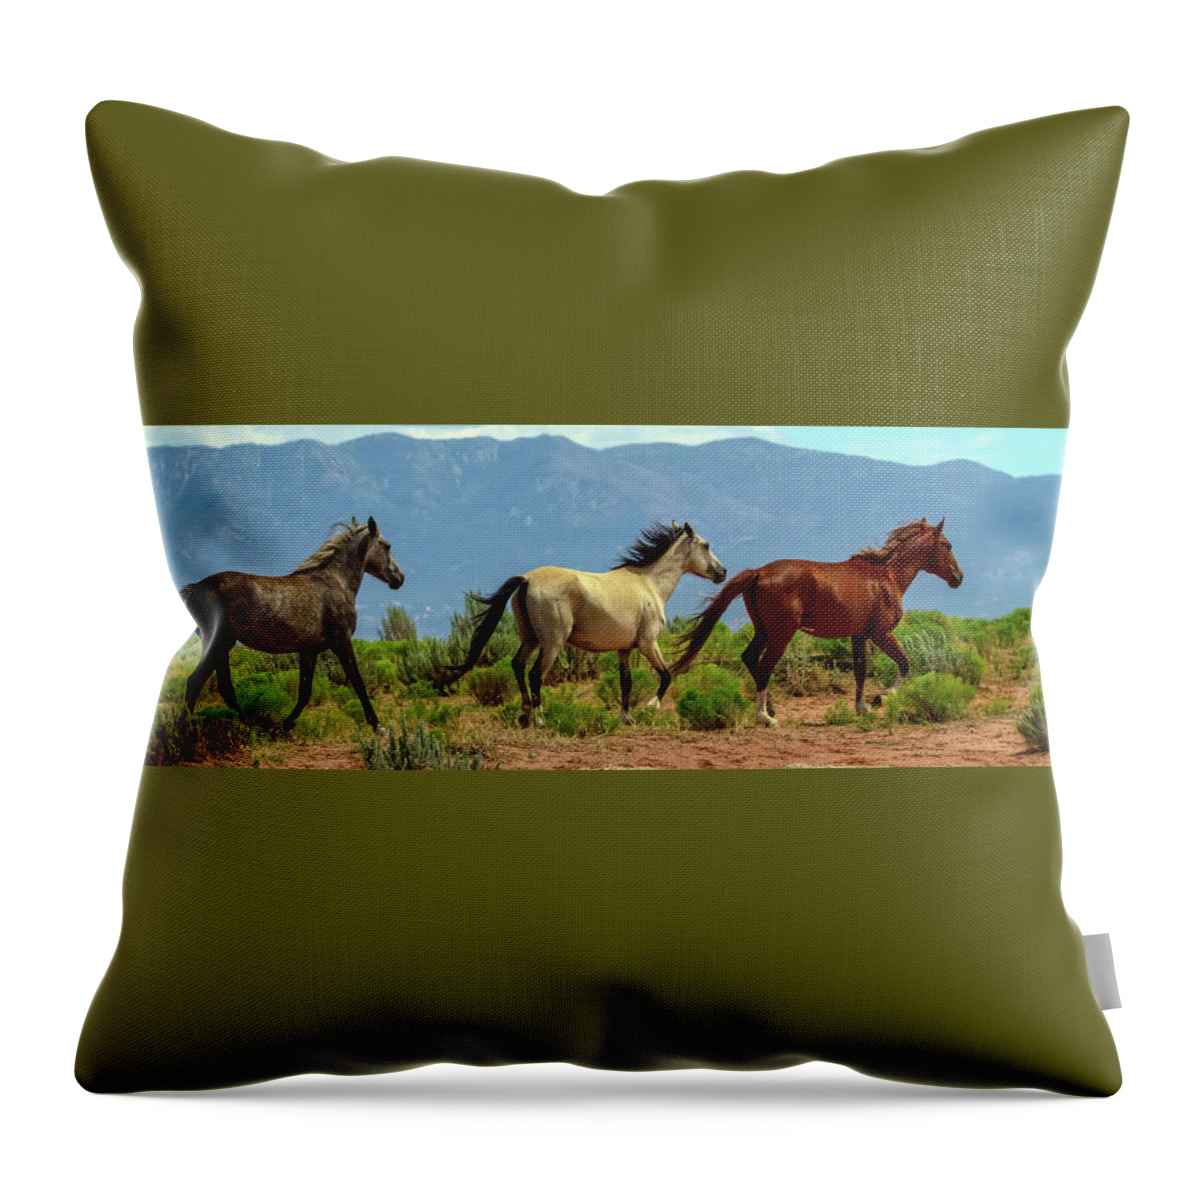 Horses Throw Pillow featuring the photograph Grey, White and Chestnut Horse Panorama View by James BO Insogna